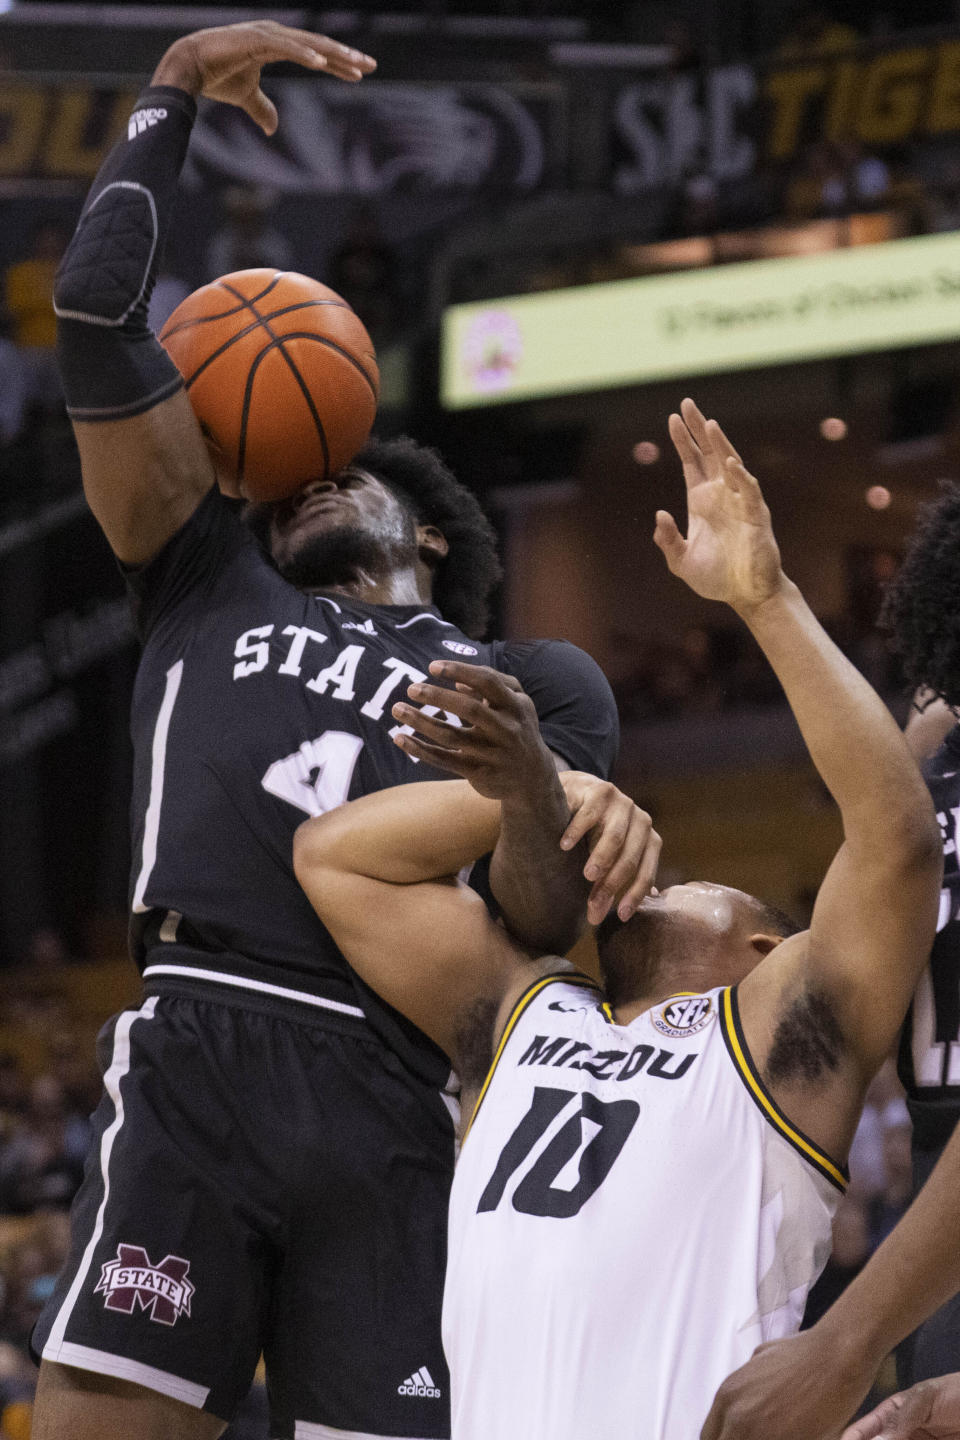 Mississippi State's Cameron Matthews, left, and Missouri's Nick Honor vie for a rebound during the first half of an NCAA college basketball game Tuesday, Feb. 21, 2023, in Columbia, Mo. (AP Photo/L.G. Patterson)